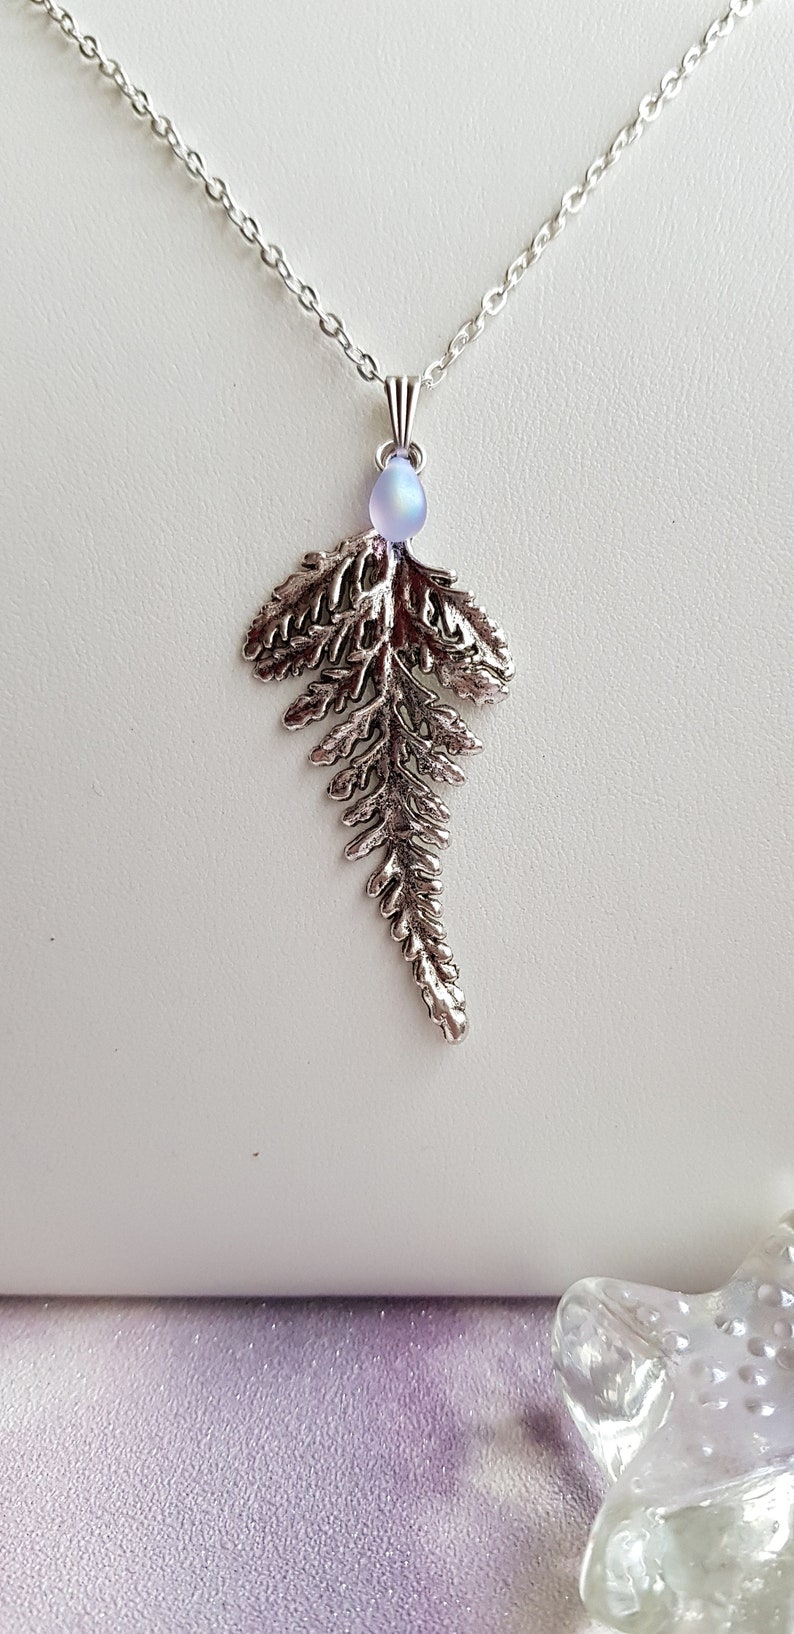 Large Fern Leaf Pendant Necklace, Layering, Choose 16 26 Silver Plate Chain, Extendable, Nature, Foliage, Bracken, Teardrop Frosted Glass image 7